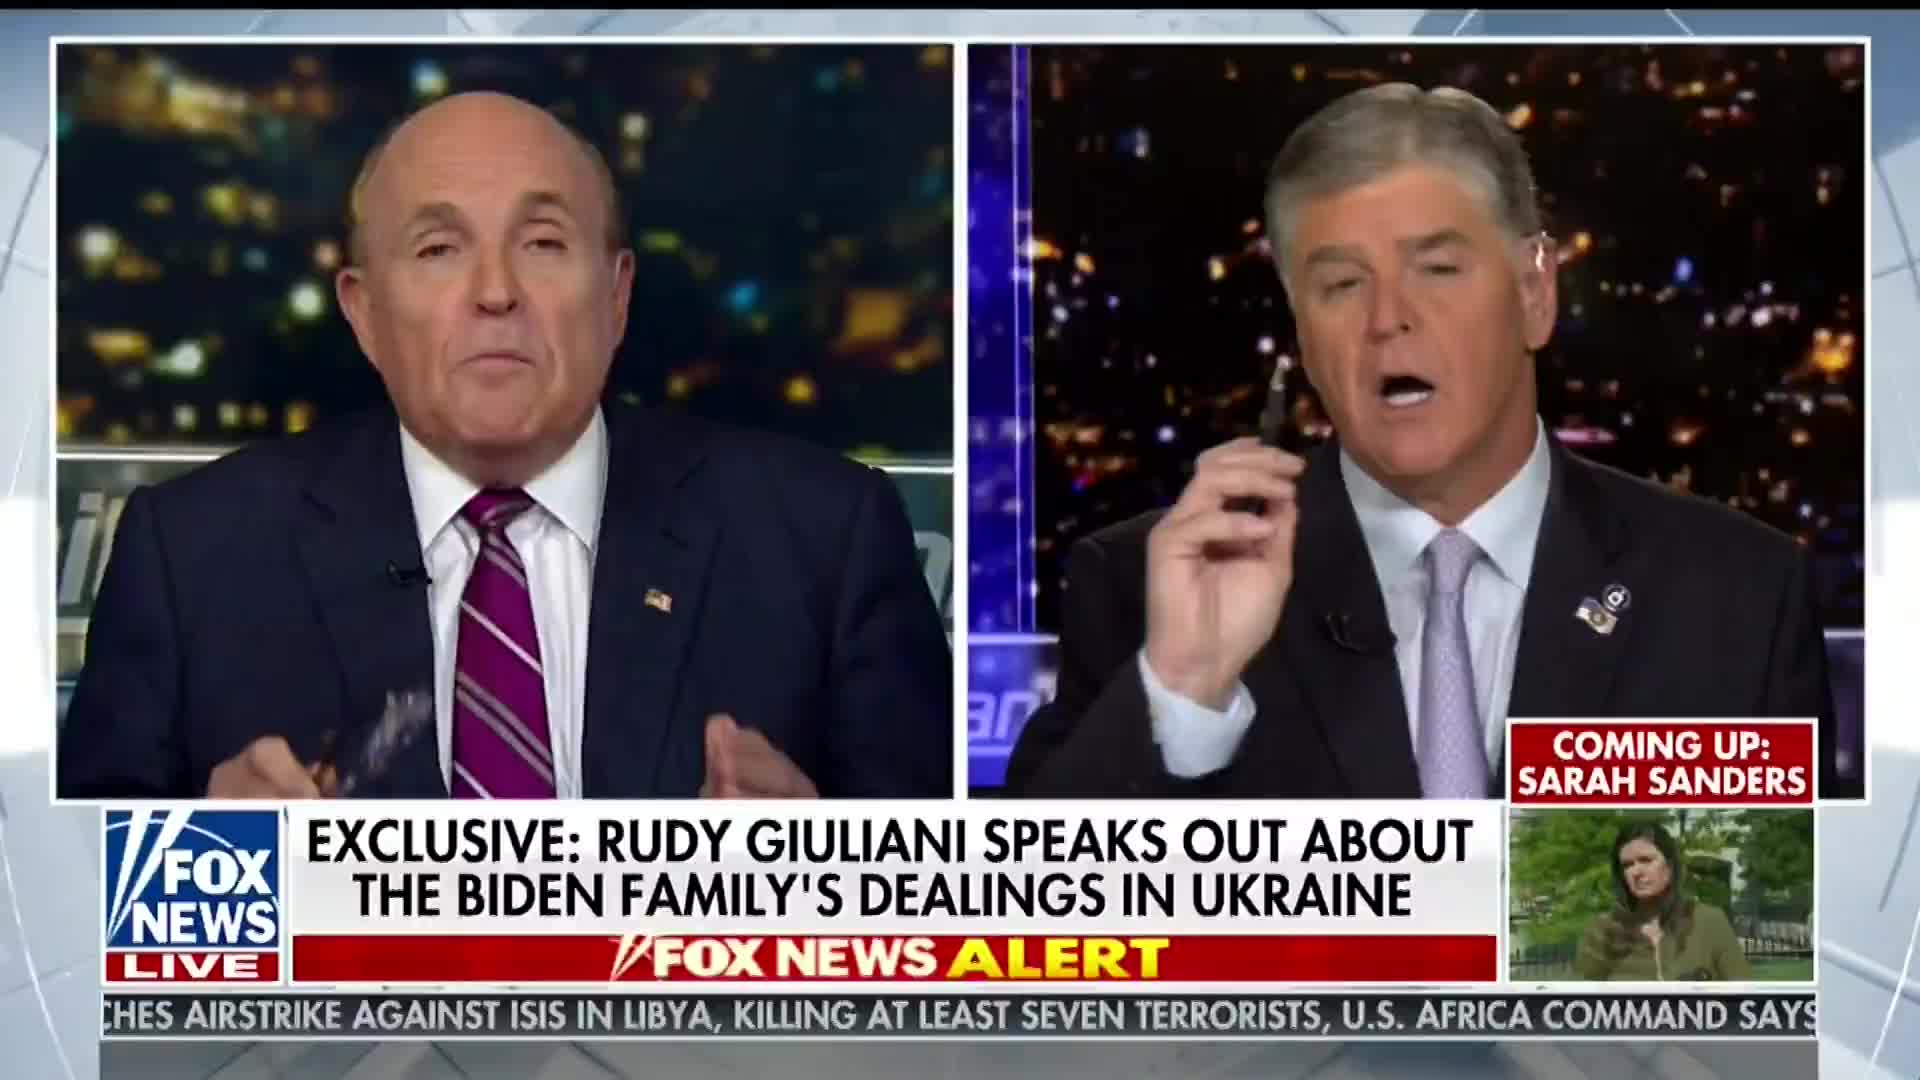 Updates on impeachment: Rudy Giuliani lawyers up, a whistleblower conspiracy and more